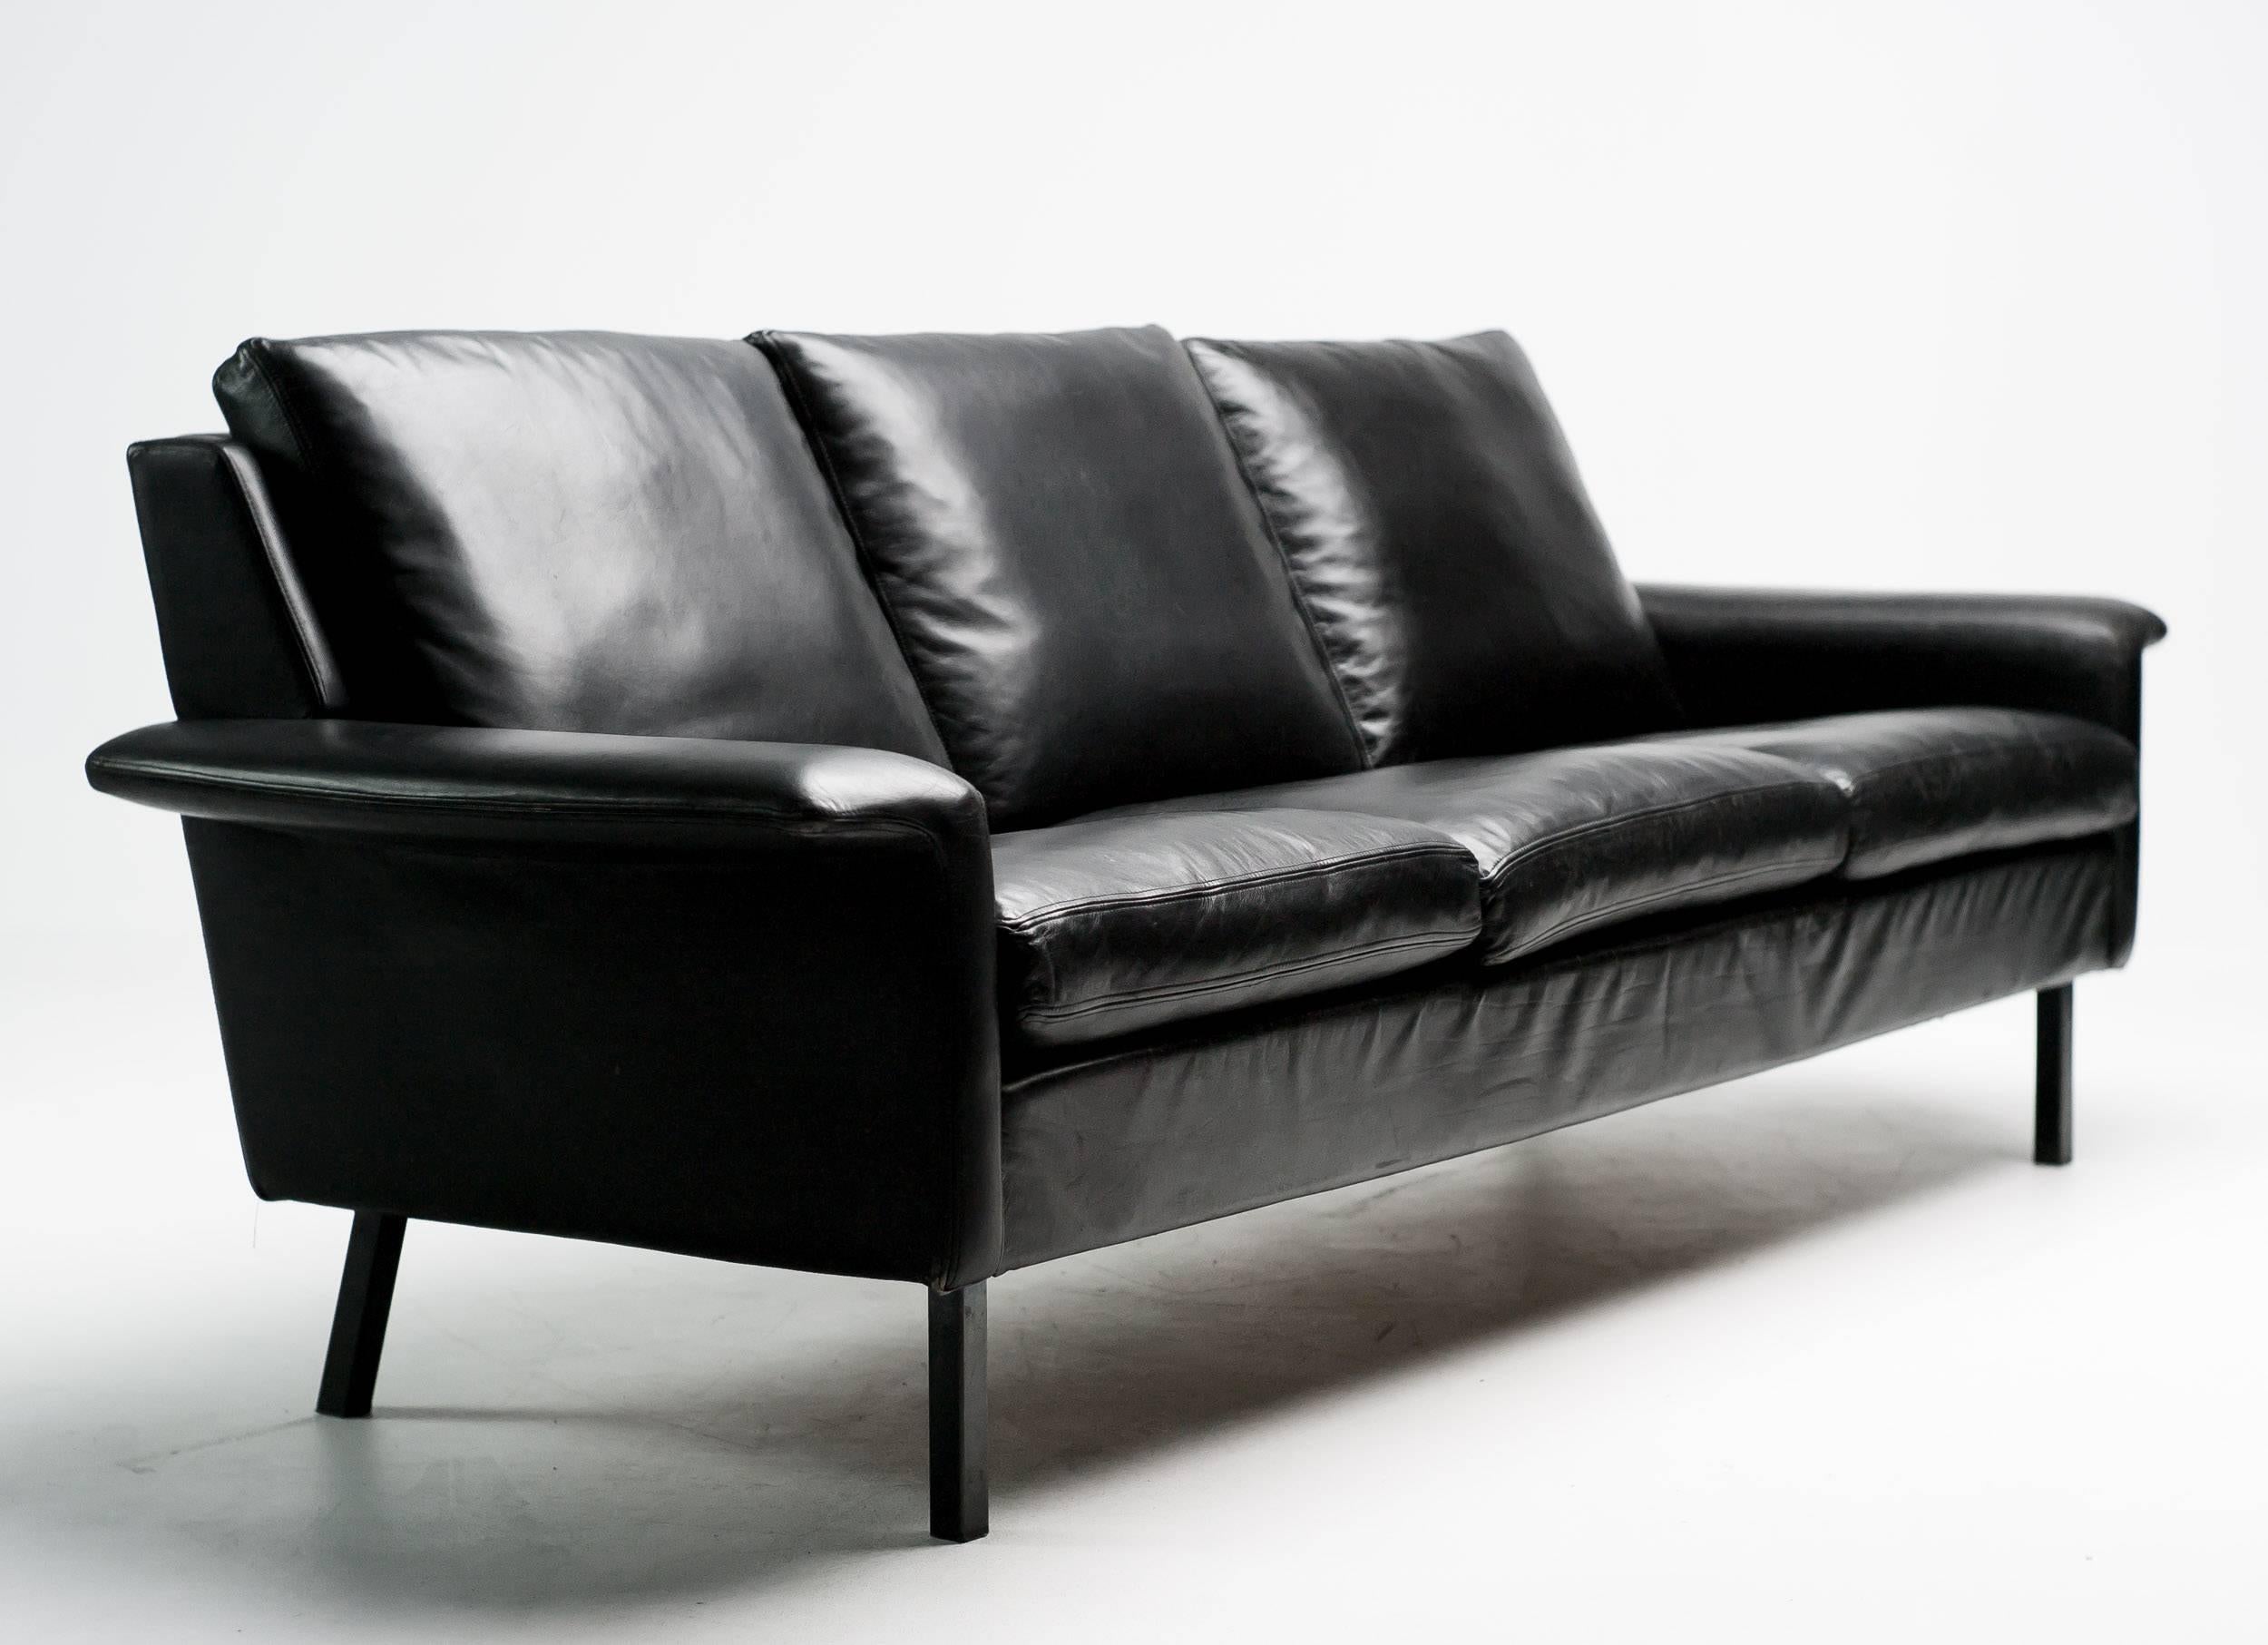 Comfortable down-filled sofa designed by Arne Vodder for Fritz Hansen. 
The original black leather is in excellent condition. 

Excellent fast and affordable worldwide shipping available.